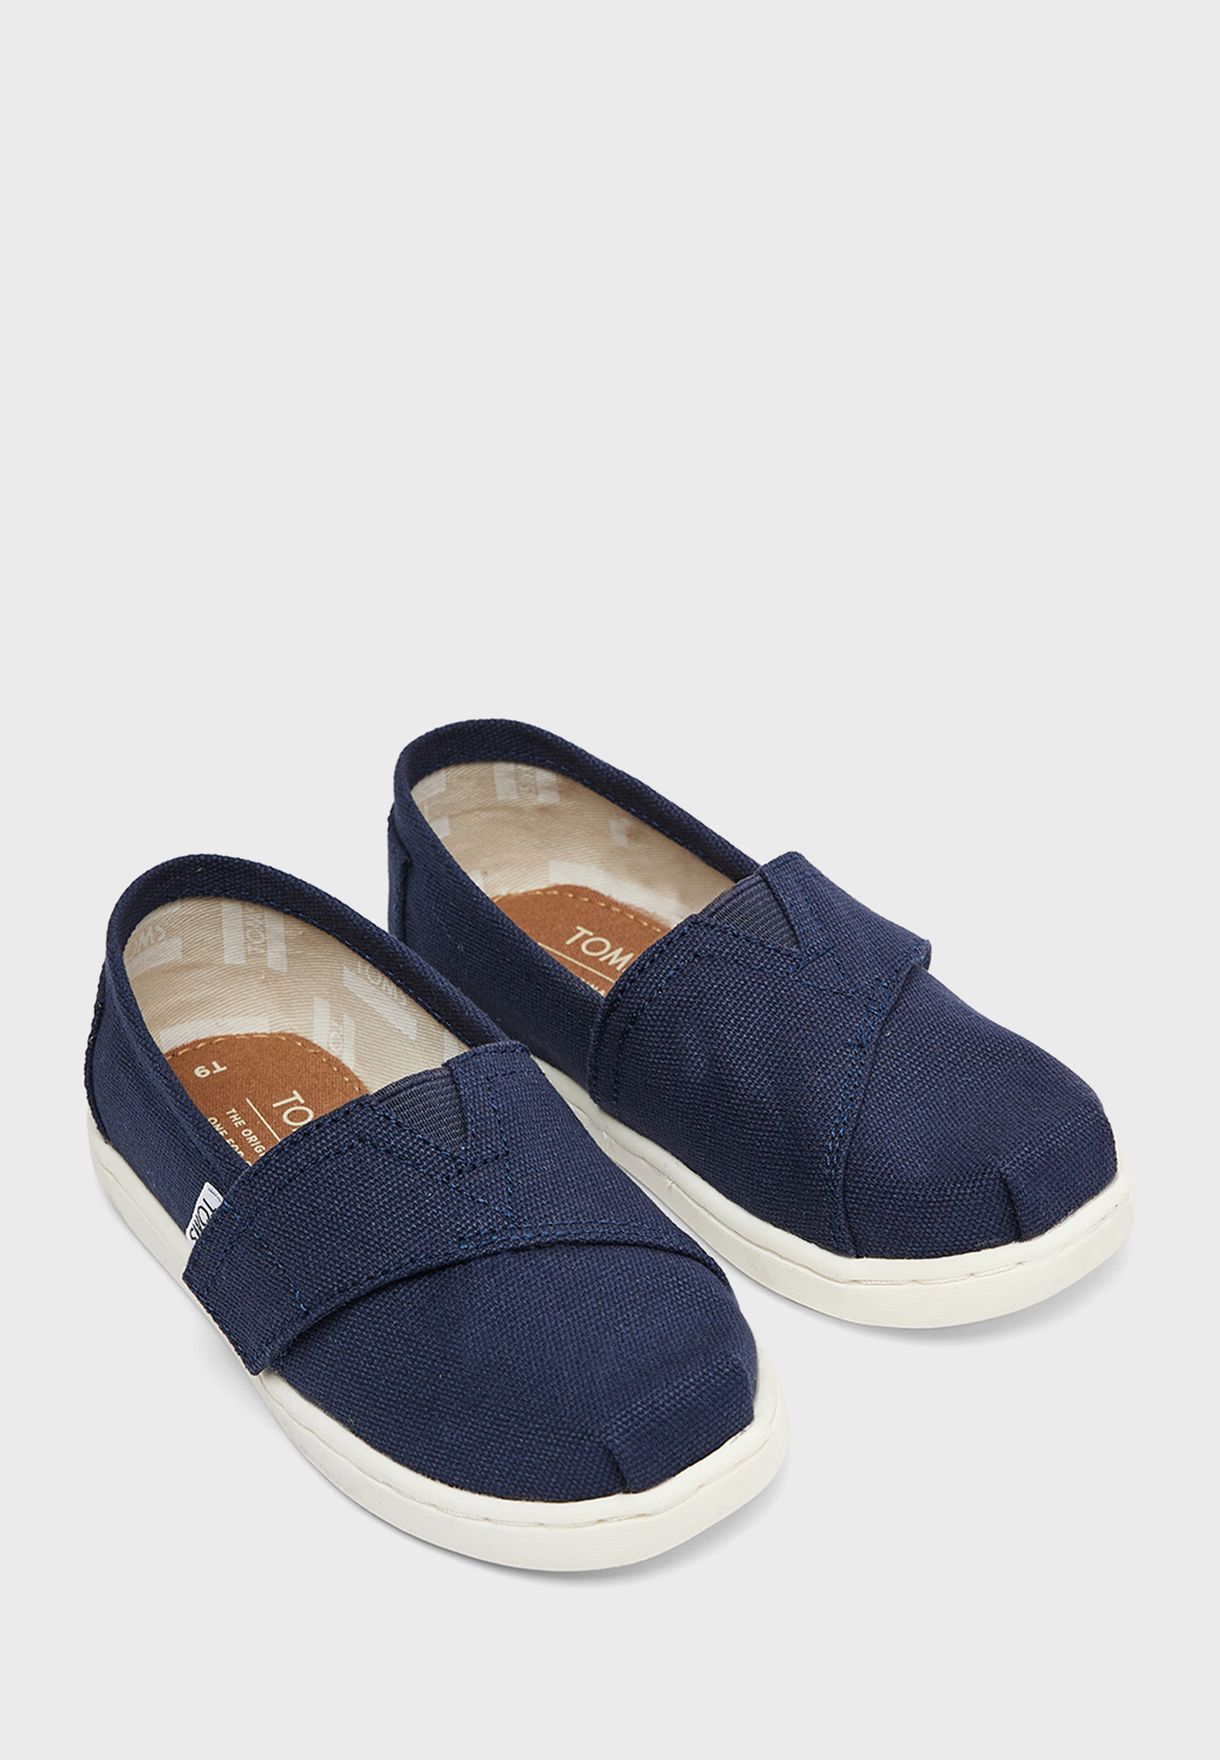 Kids Classic Slip-Ons Loafers